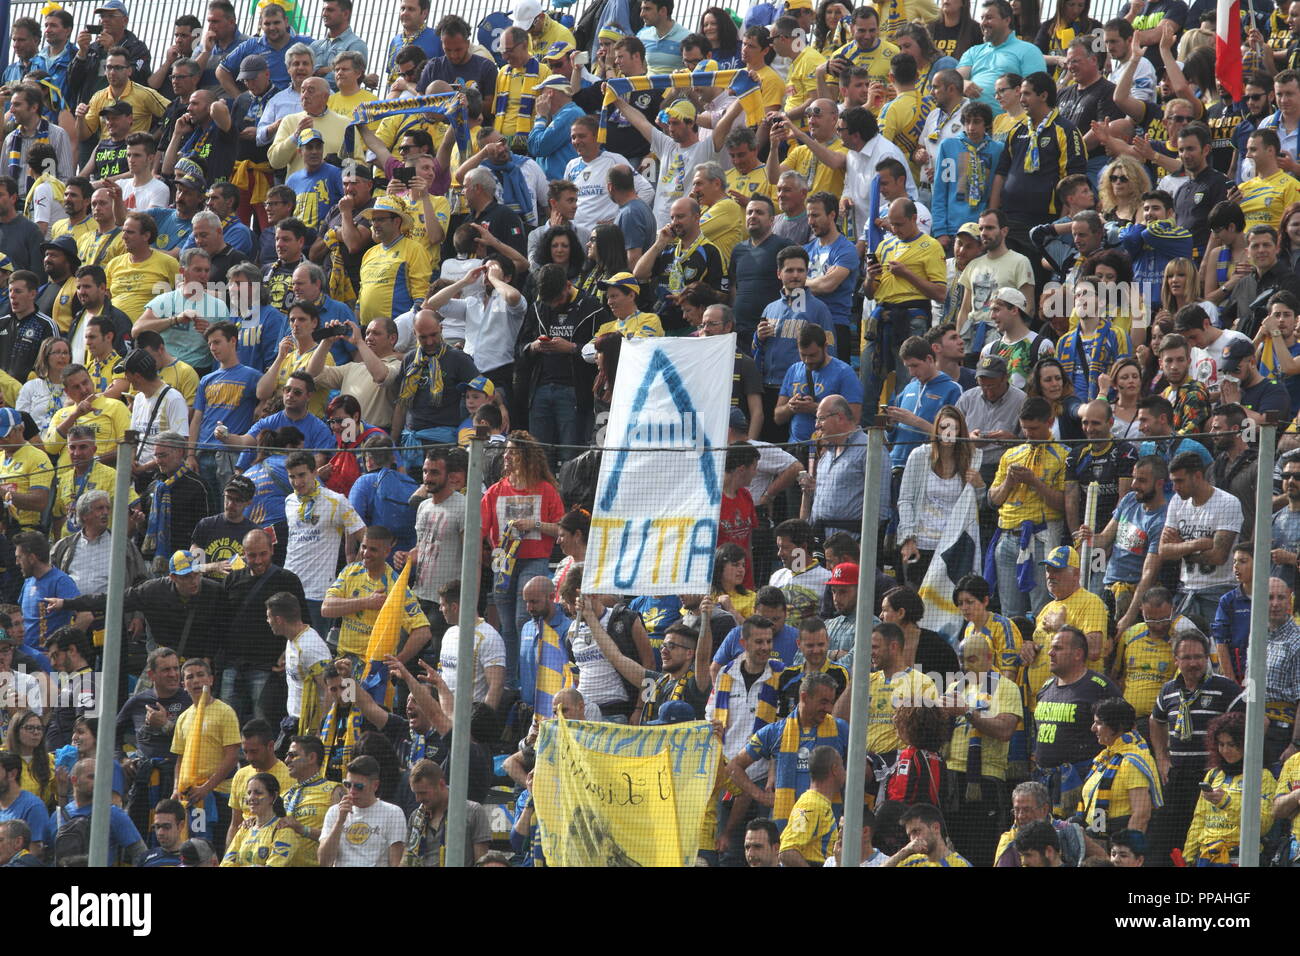 Frosinone / Italy - May 16, 2015: Canary fans at the stadium in the match that will promote the team in Serie A Stock Photo